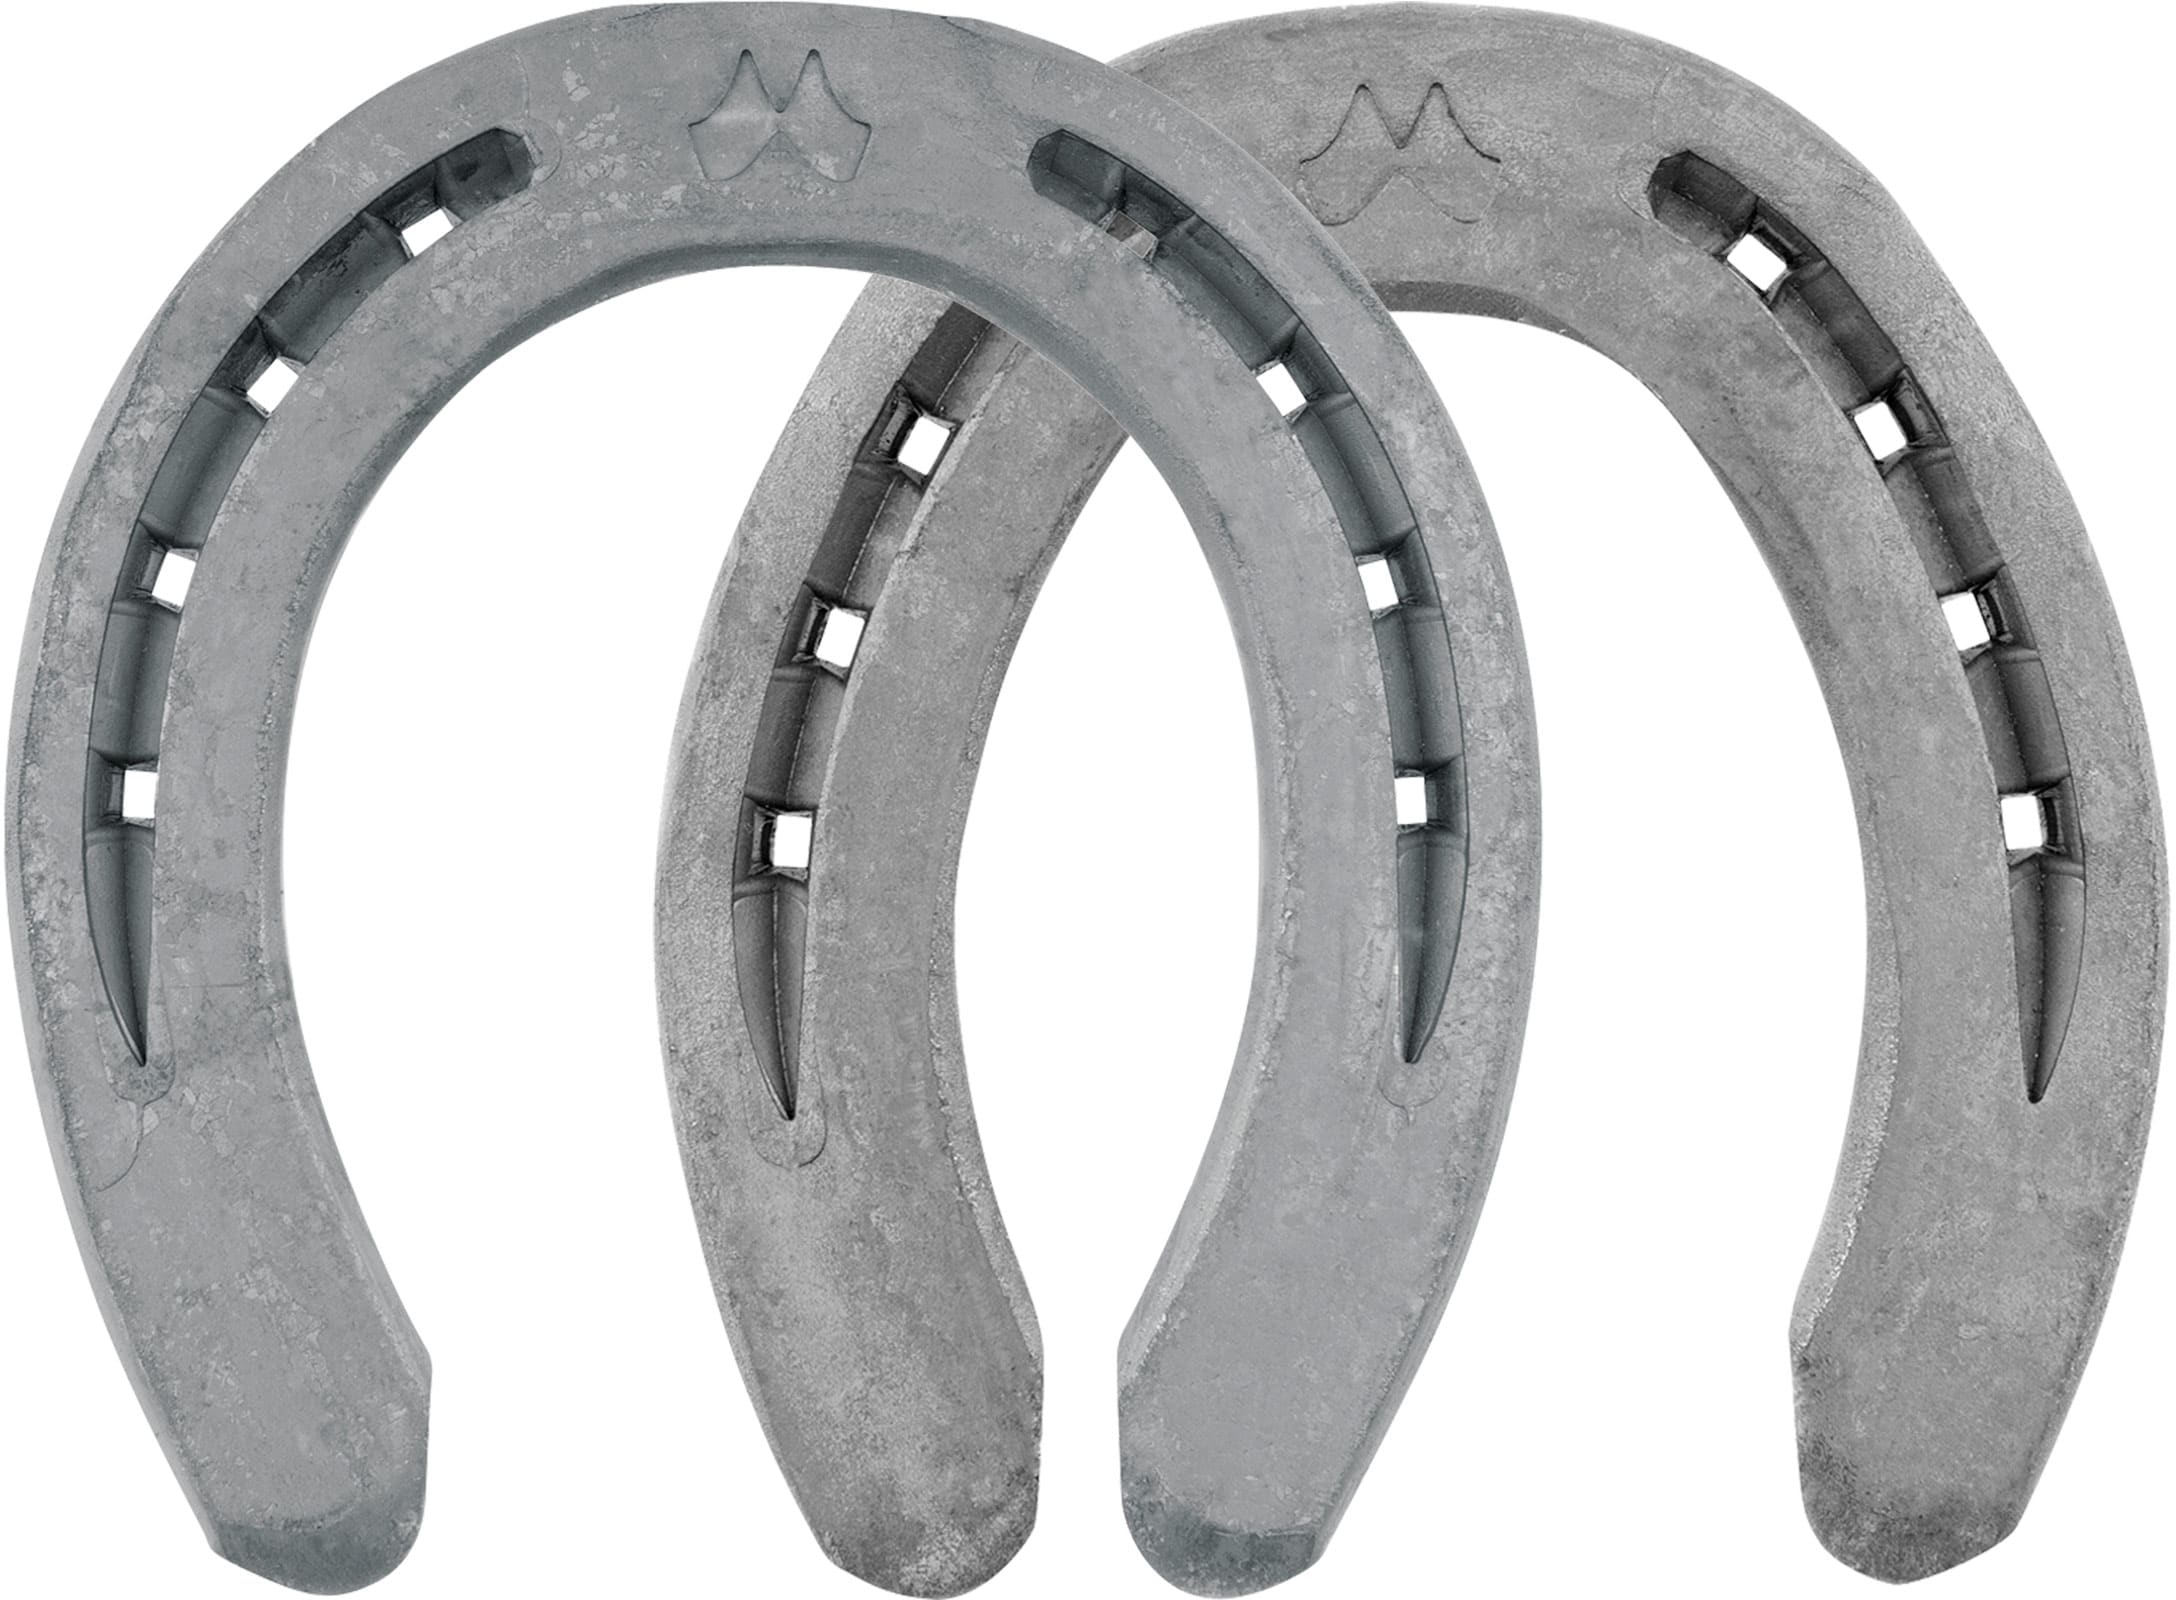 Mustad DM Icelandic horseshoes, front and hind, bottom view